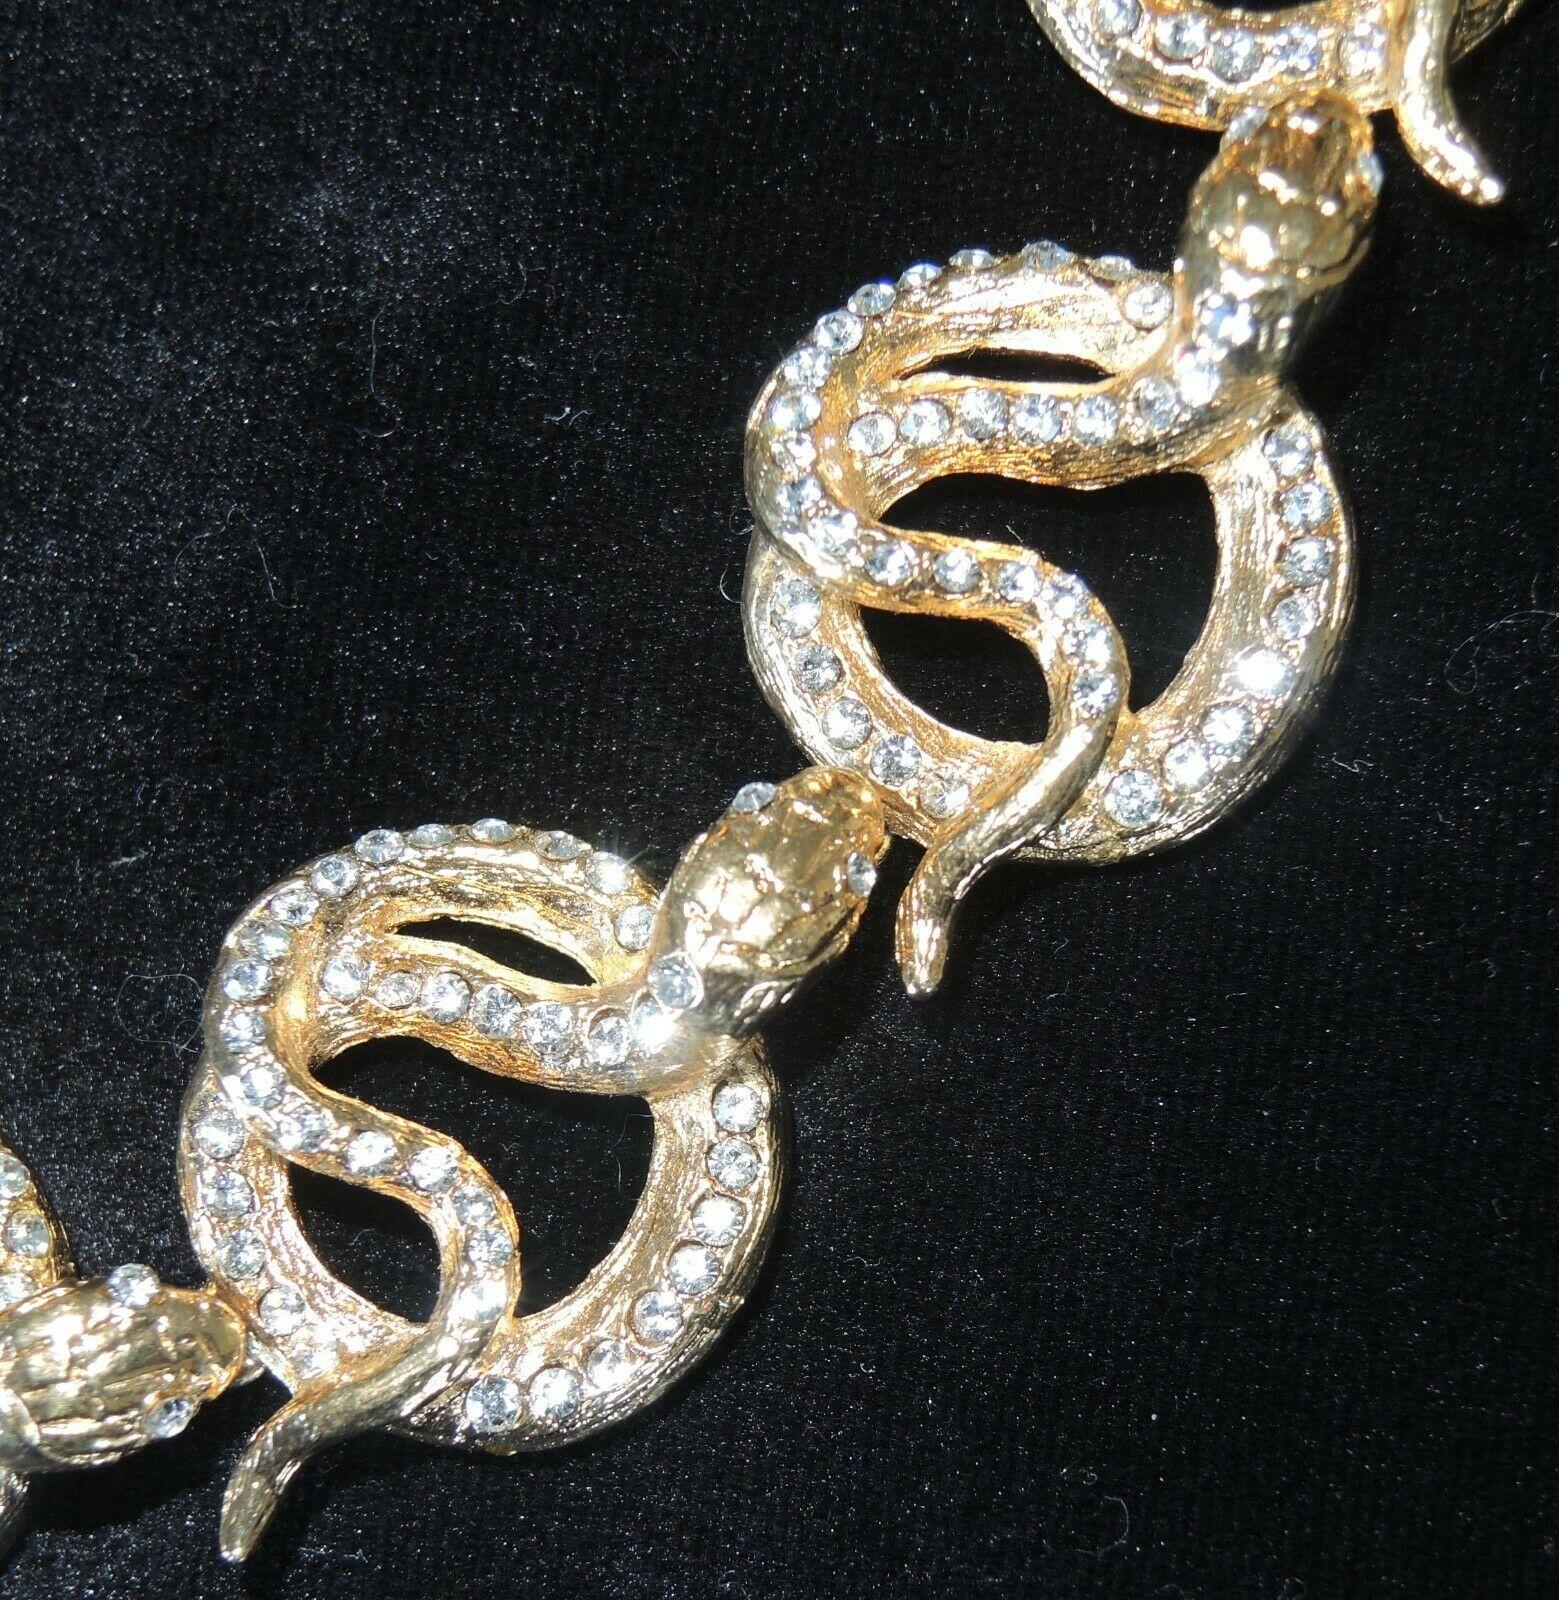 Designer Carlo Zini Sparkling Crystal Serpent Snake Choker Necklace; Gold tone mounting Hand set with Sparkling Crystals. Lobster clasp closure; approx. length is 17.5” Signed: CARLO ZINI on oval plaque. Made in Milano Italy. Never worn. Original